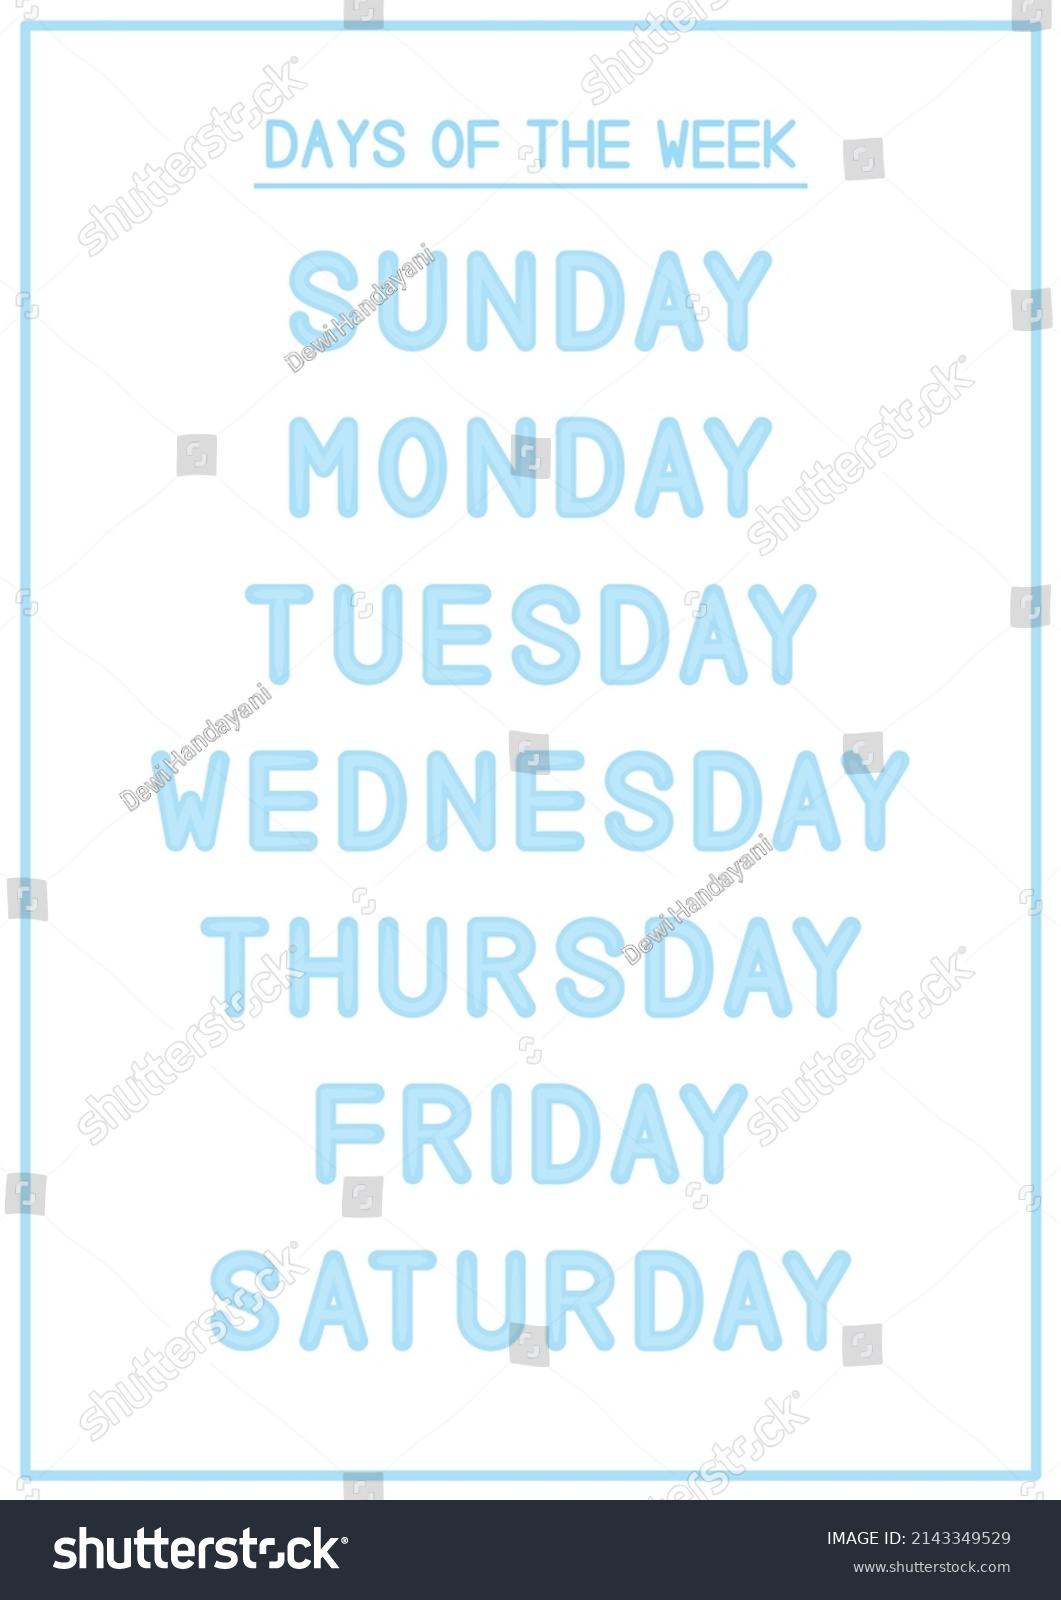 children-learning-printable-days-week-poster-stock-vector-royalty-free